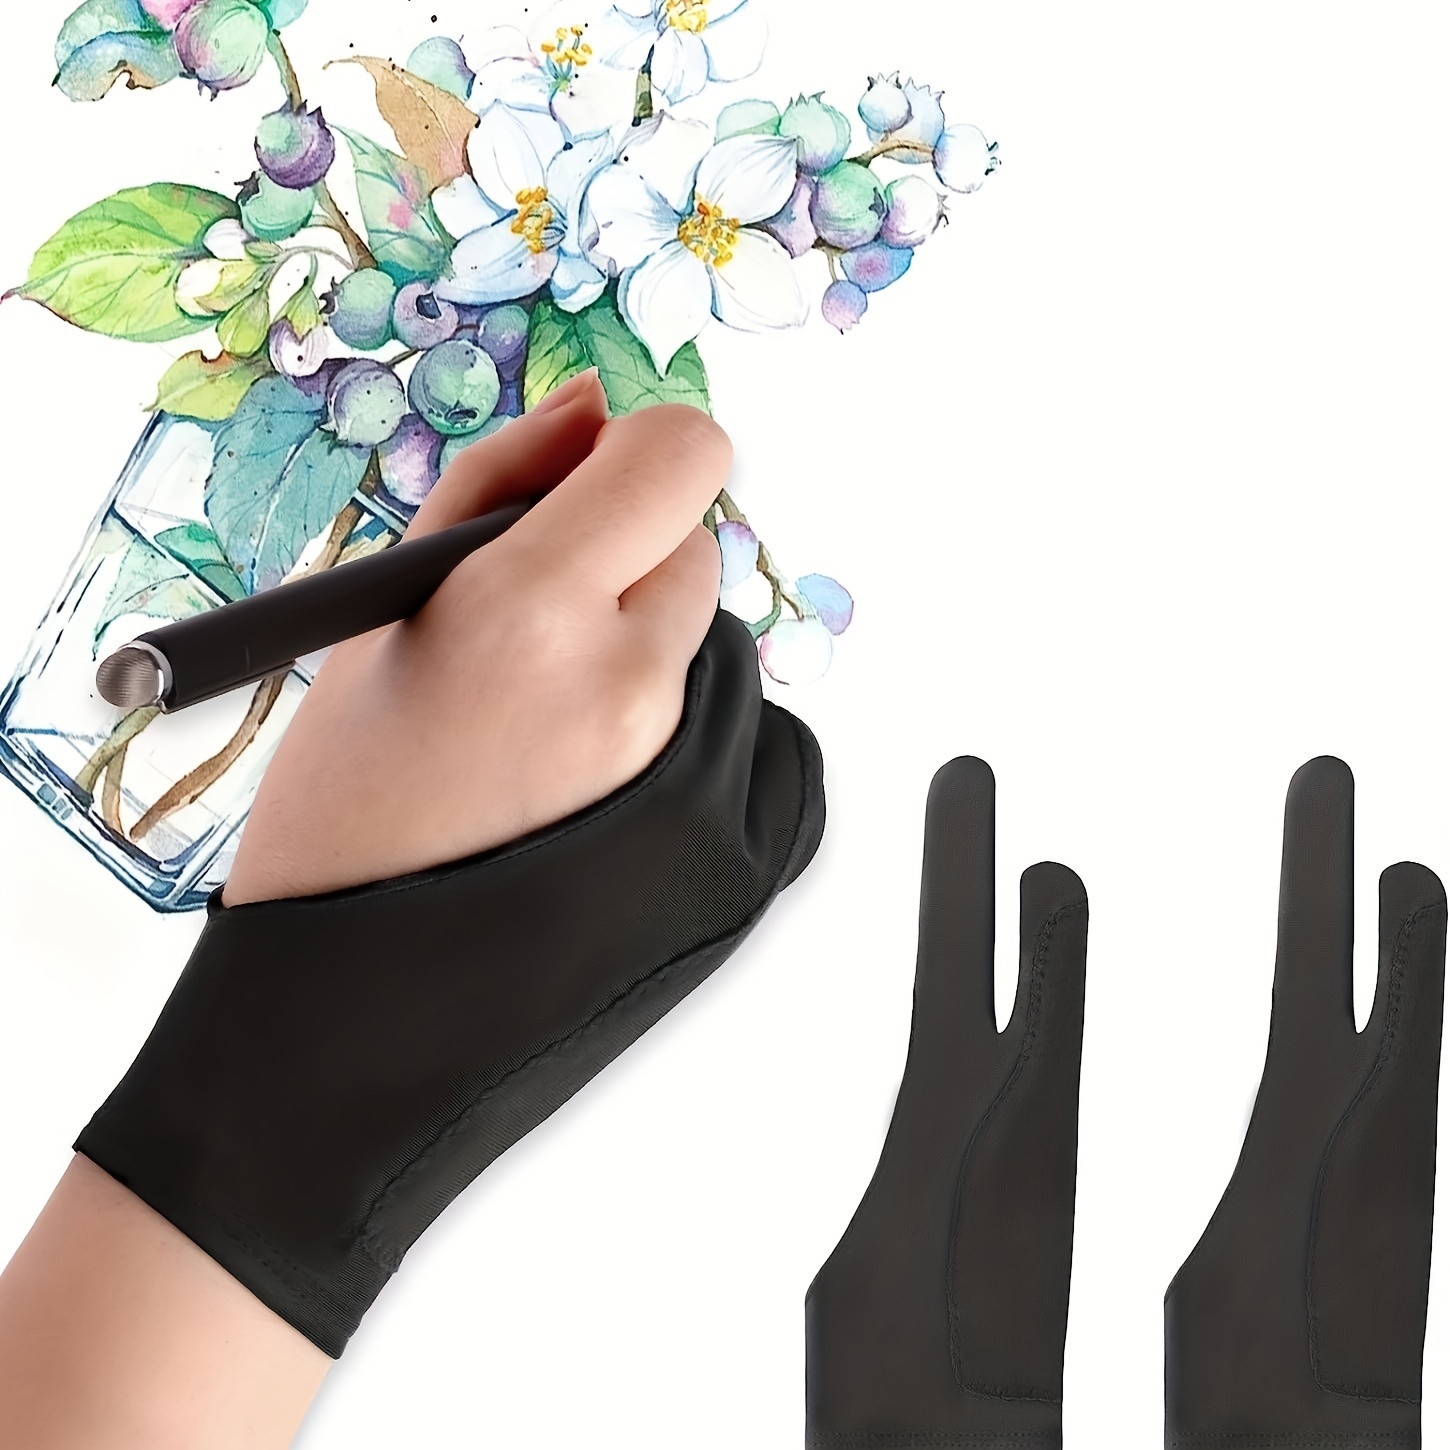  2pcs Black Two-Finger Glove for Graphics Drawing Tablet Light  Box Tracing Light Pad,Artist Gloves for Graphics Tablet iPad Pro,Left or  Right Hand : Electronics